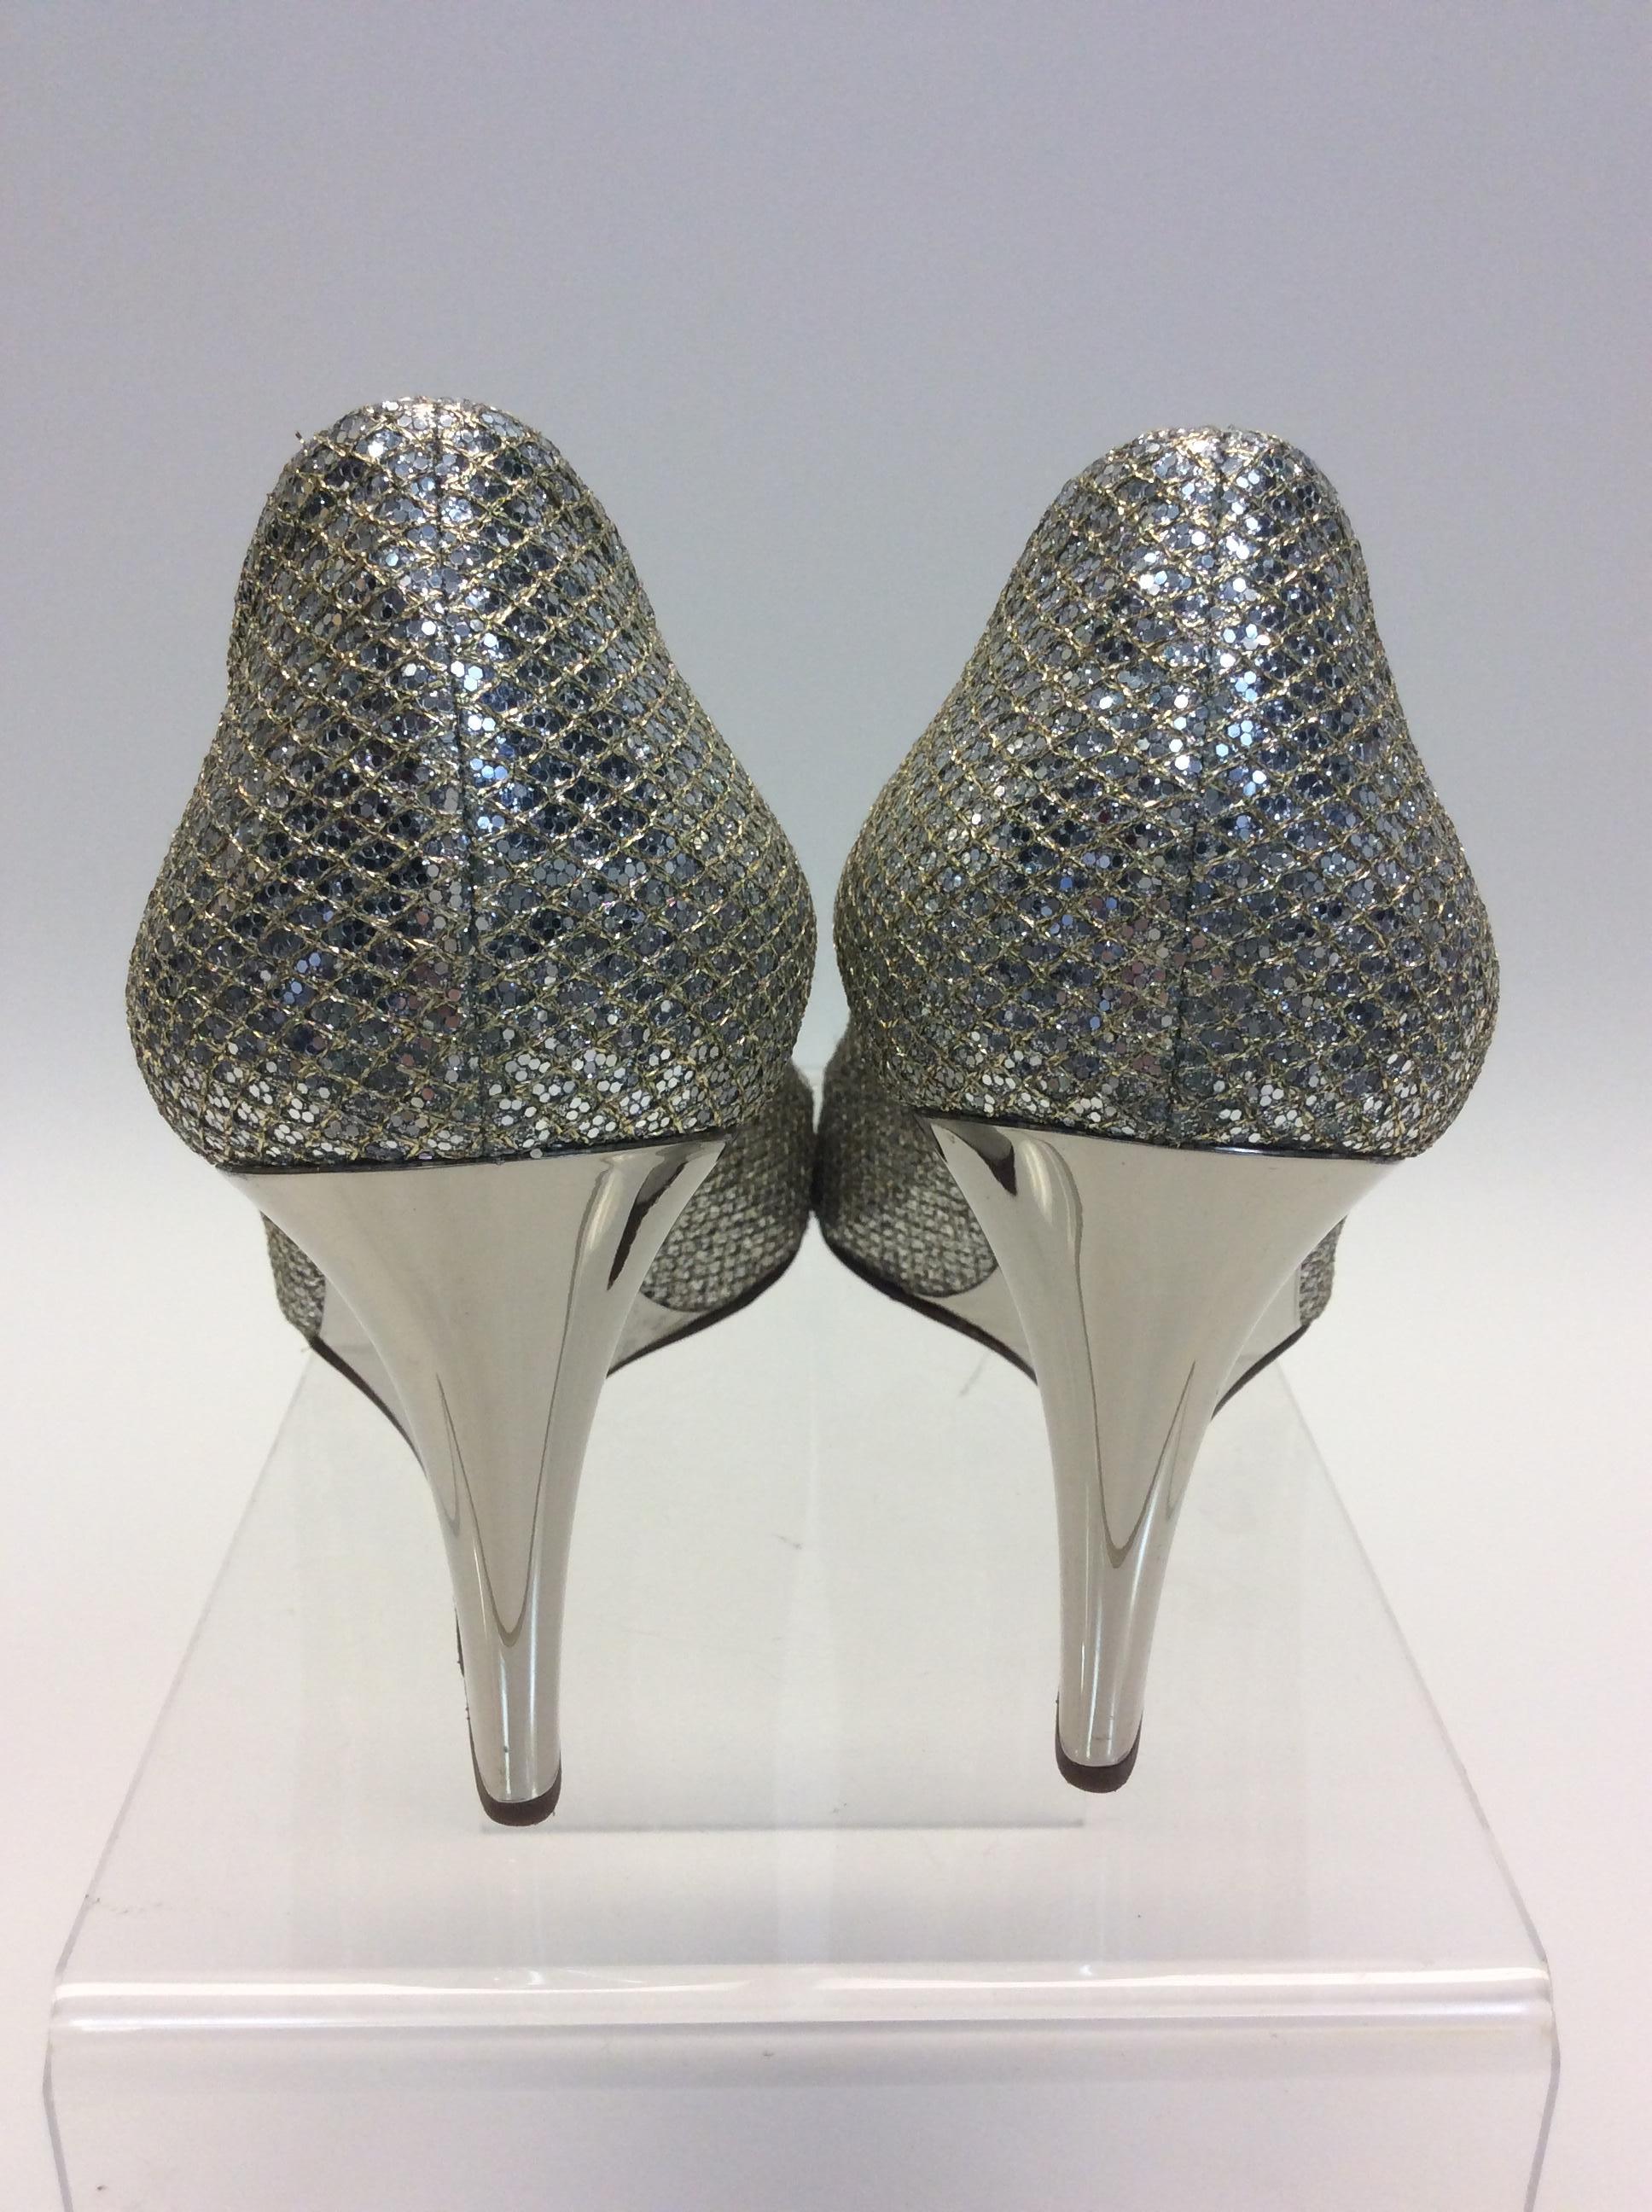 Jimmy Choo Metallic Peep Toe Wedge In Good Condition For Sale In Narberth, PA